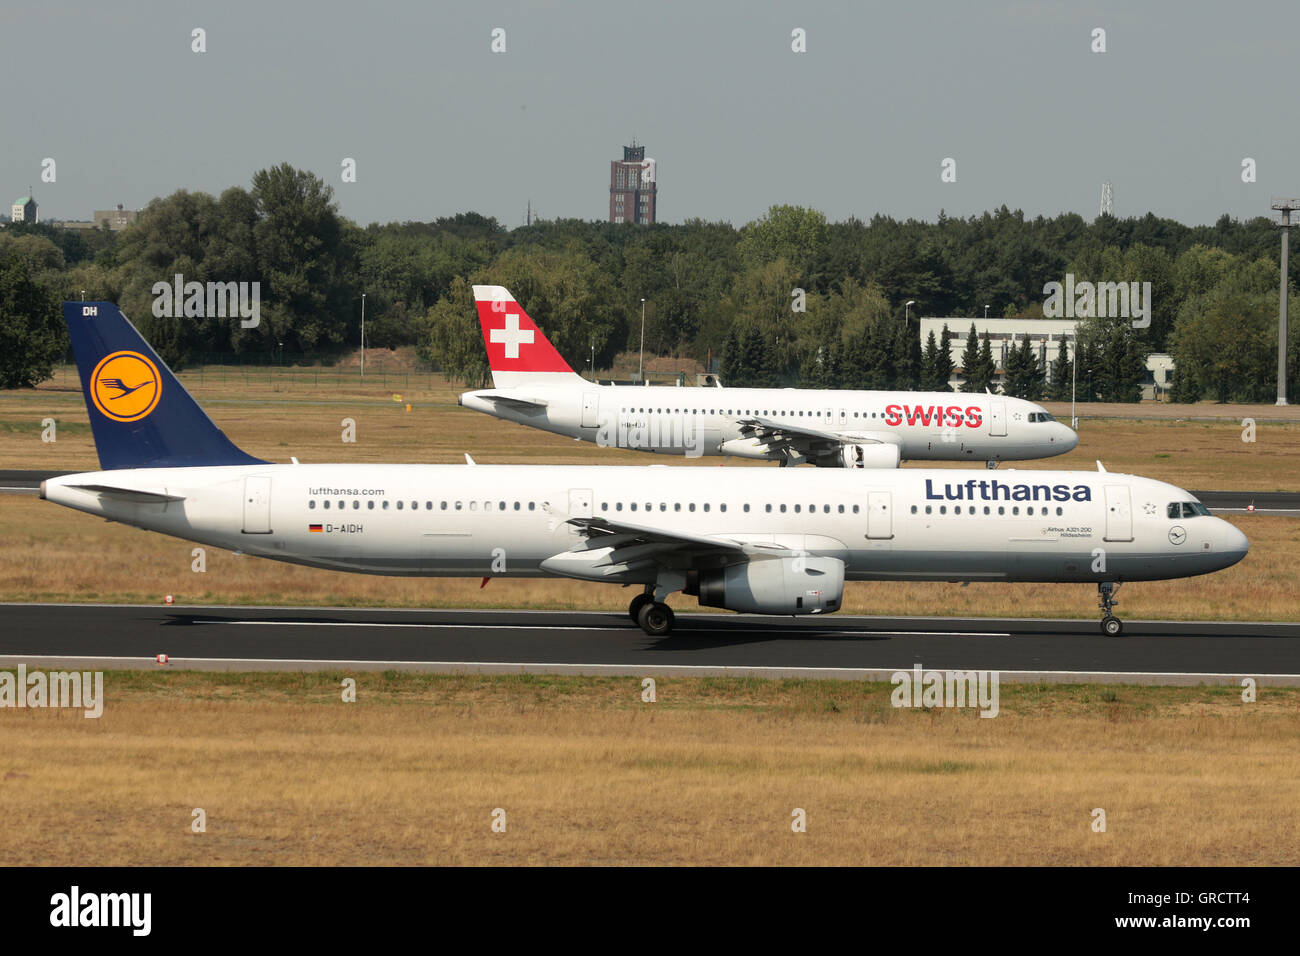 Swiss Airbus A319 With Registration Hb-Ijj And Lufthansa D-Aidh On Runway At Berlin Tegel Airport Txl Stock Photo